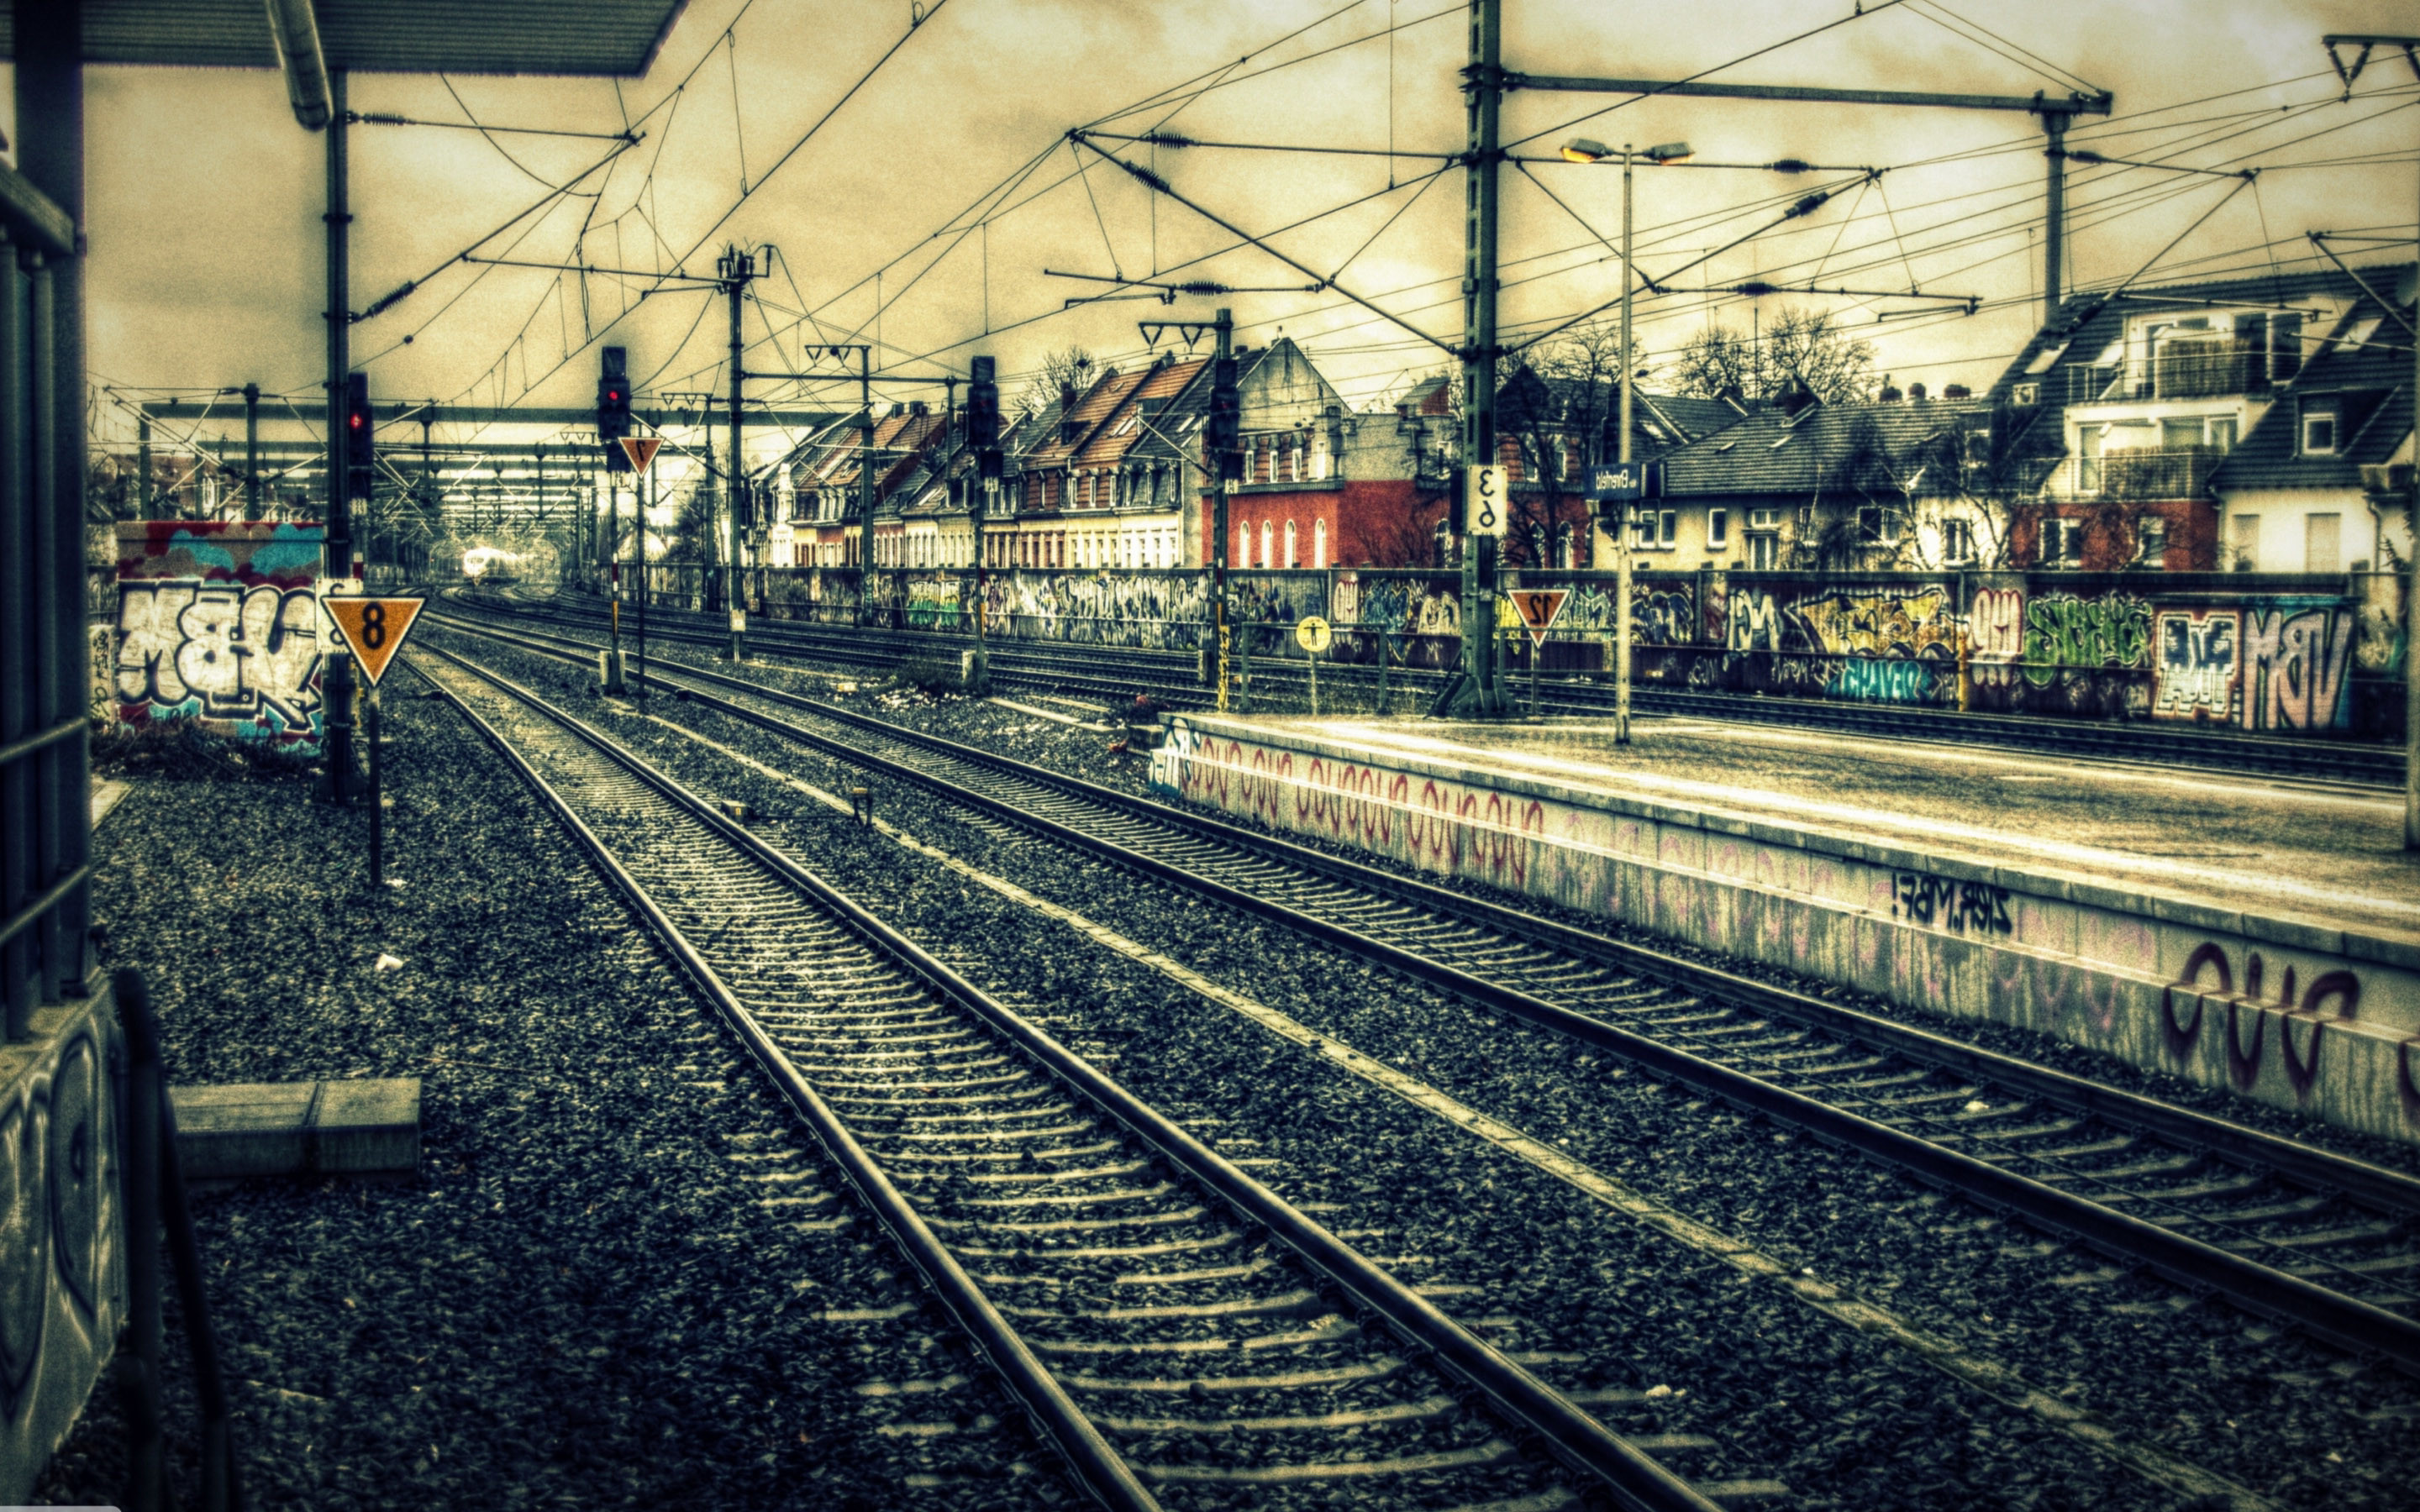 2880x1800 Train station Top 15 Windows 8.1 Wallpapers and Download free Train station  Windows XP/7/8 Desktop Backgrounds #backgrounds #Wallpaper #Themes  #TrainStation